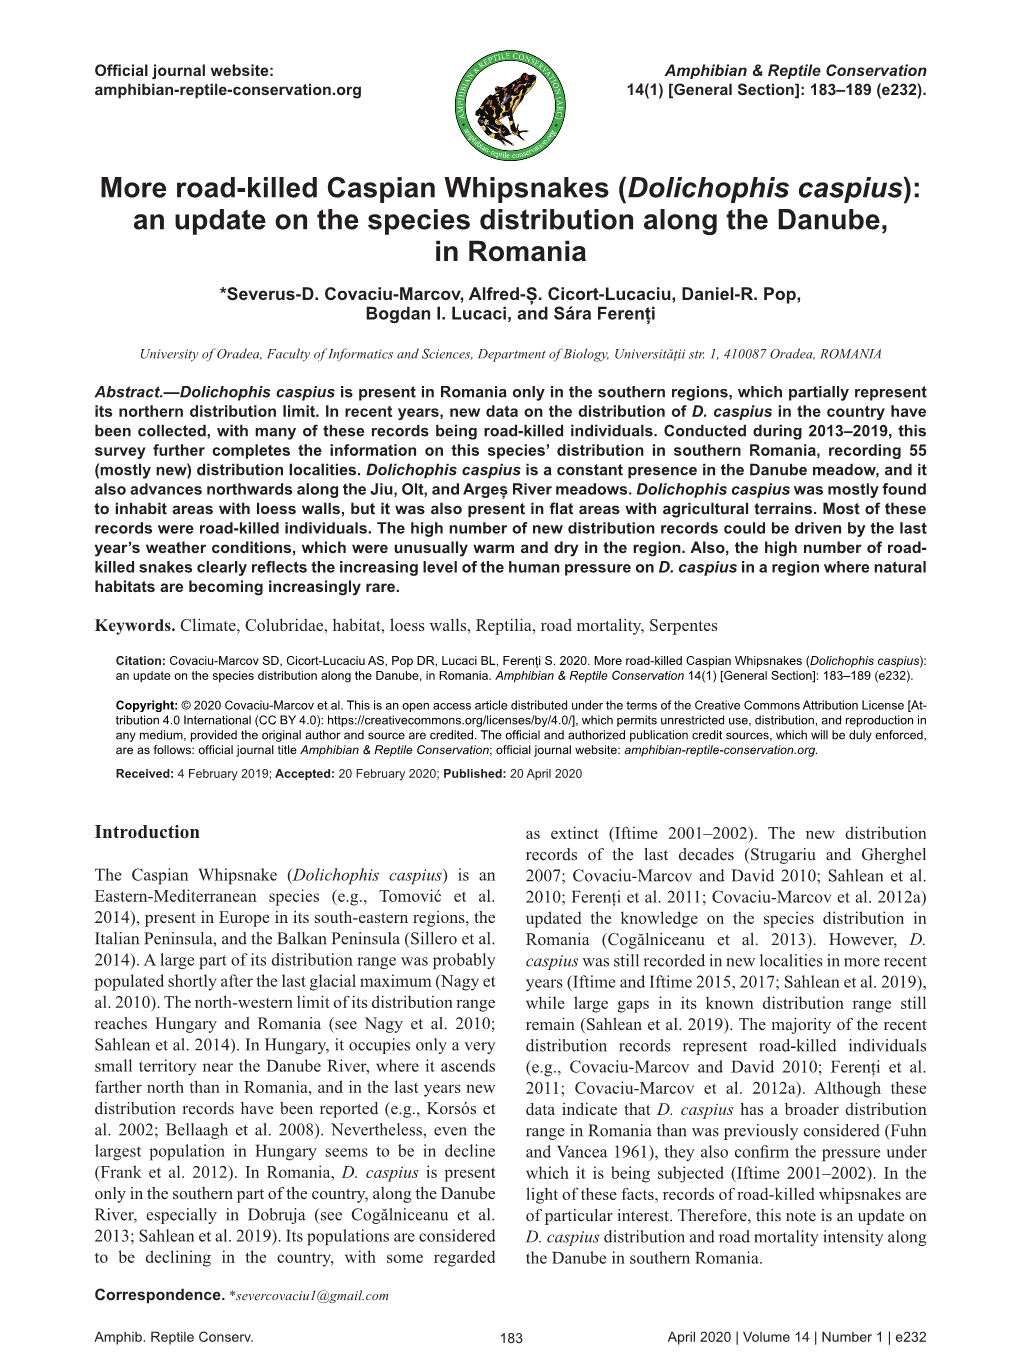 Dolichophis Caspius): an Update on the Species Distribution Along the Danube, in Romania *Severus-D